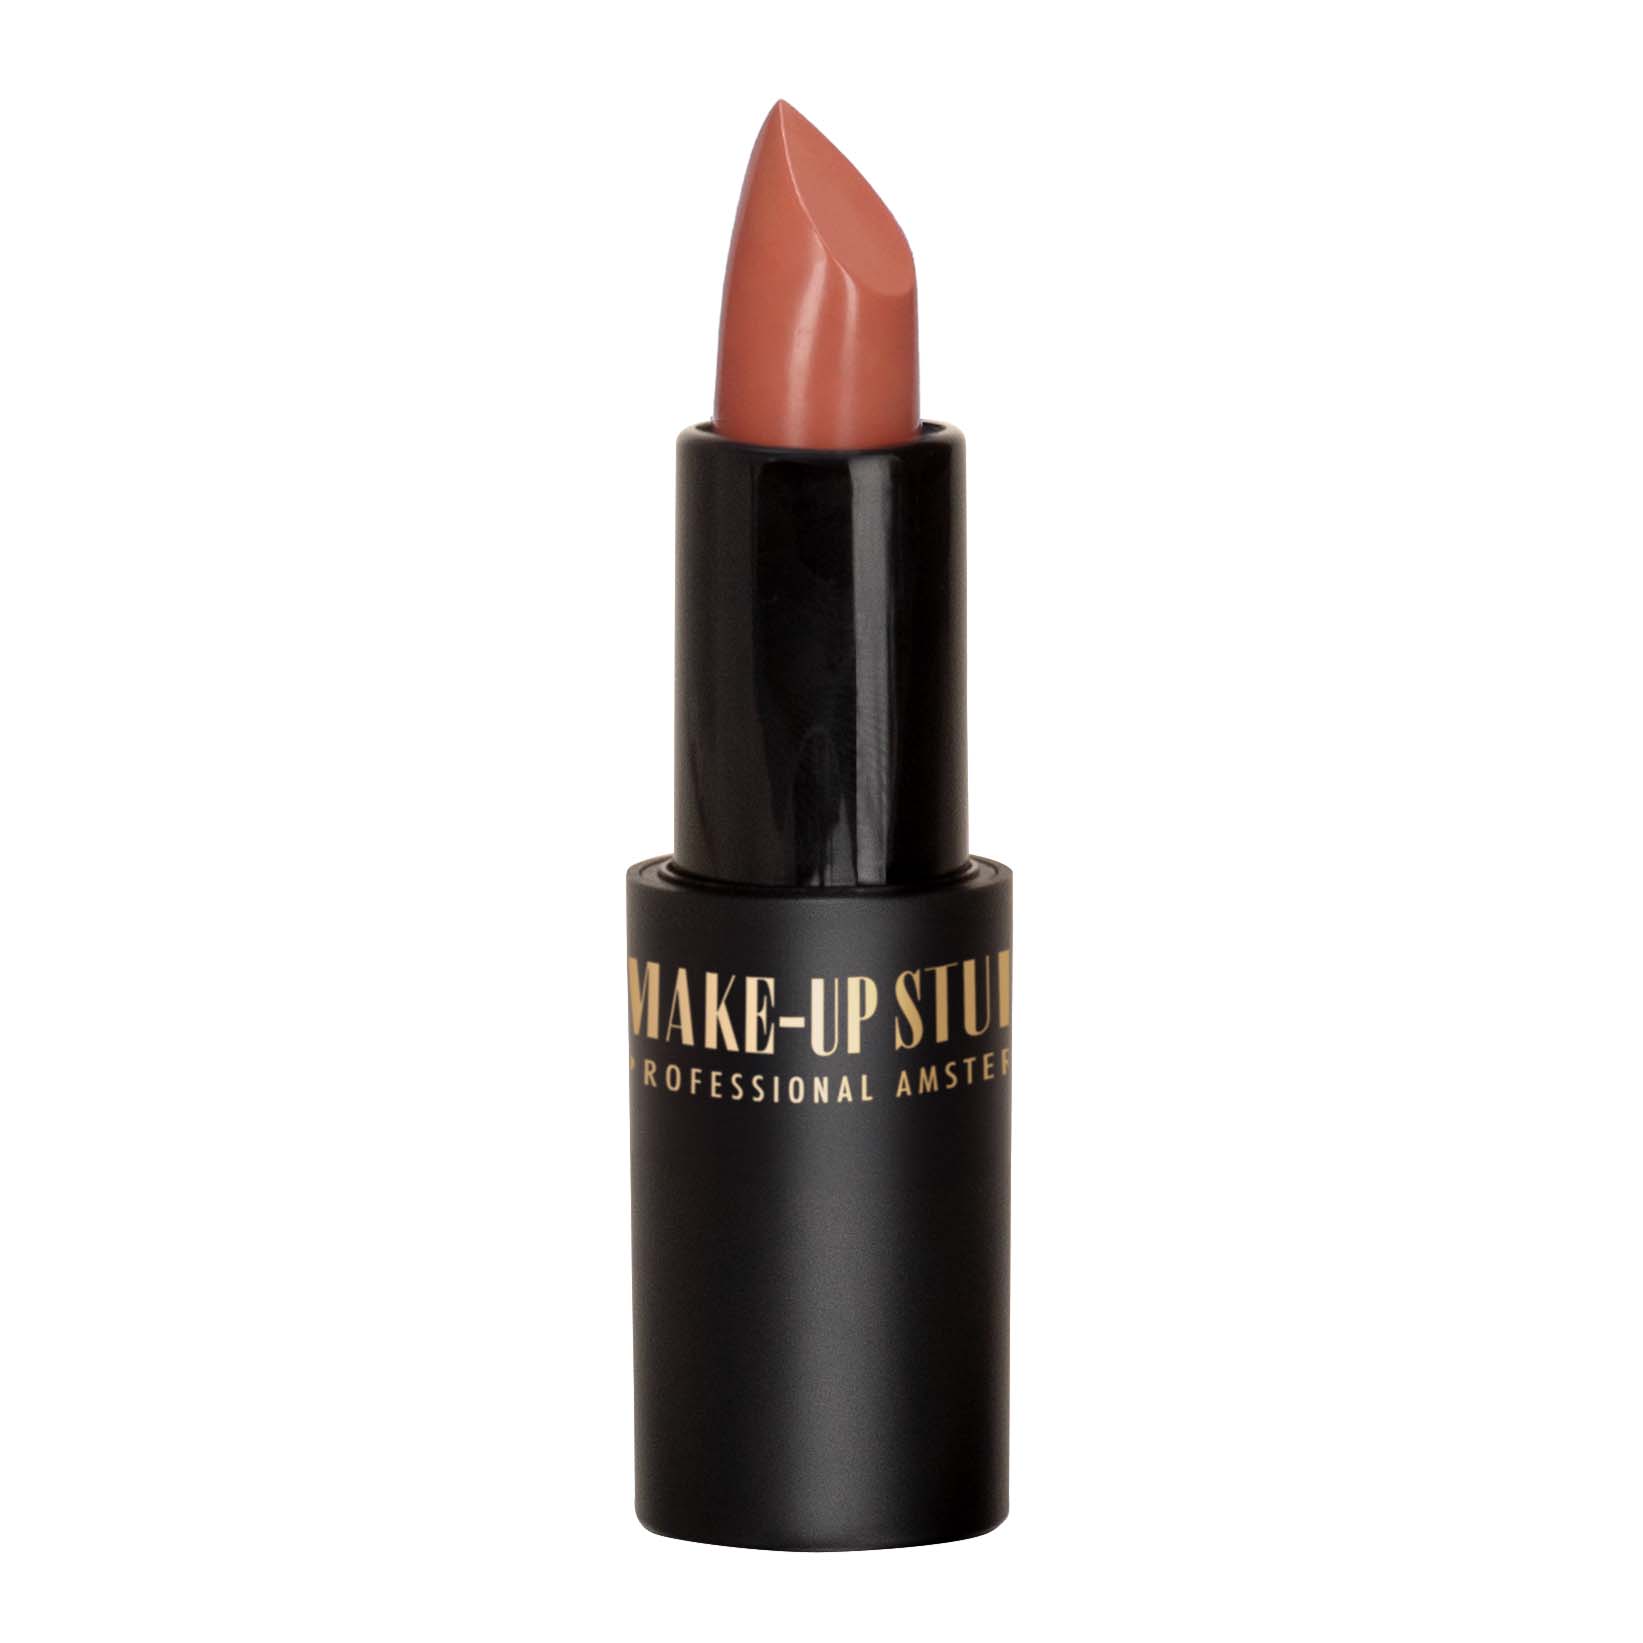 Shop all lip products Studio Amsterdam Studio | online! Make-up from Make-up